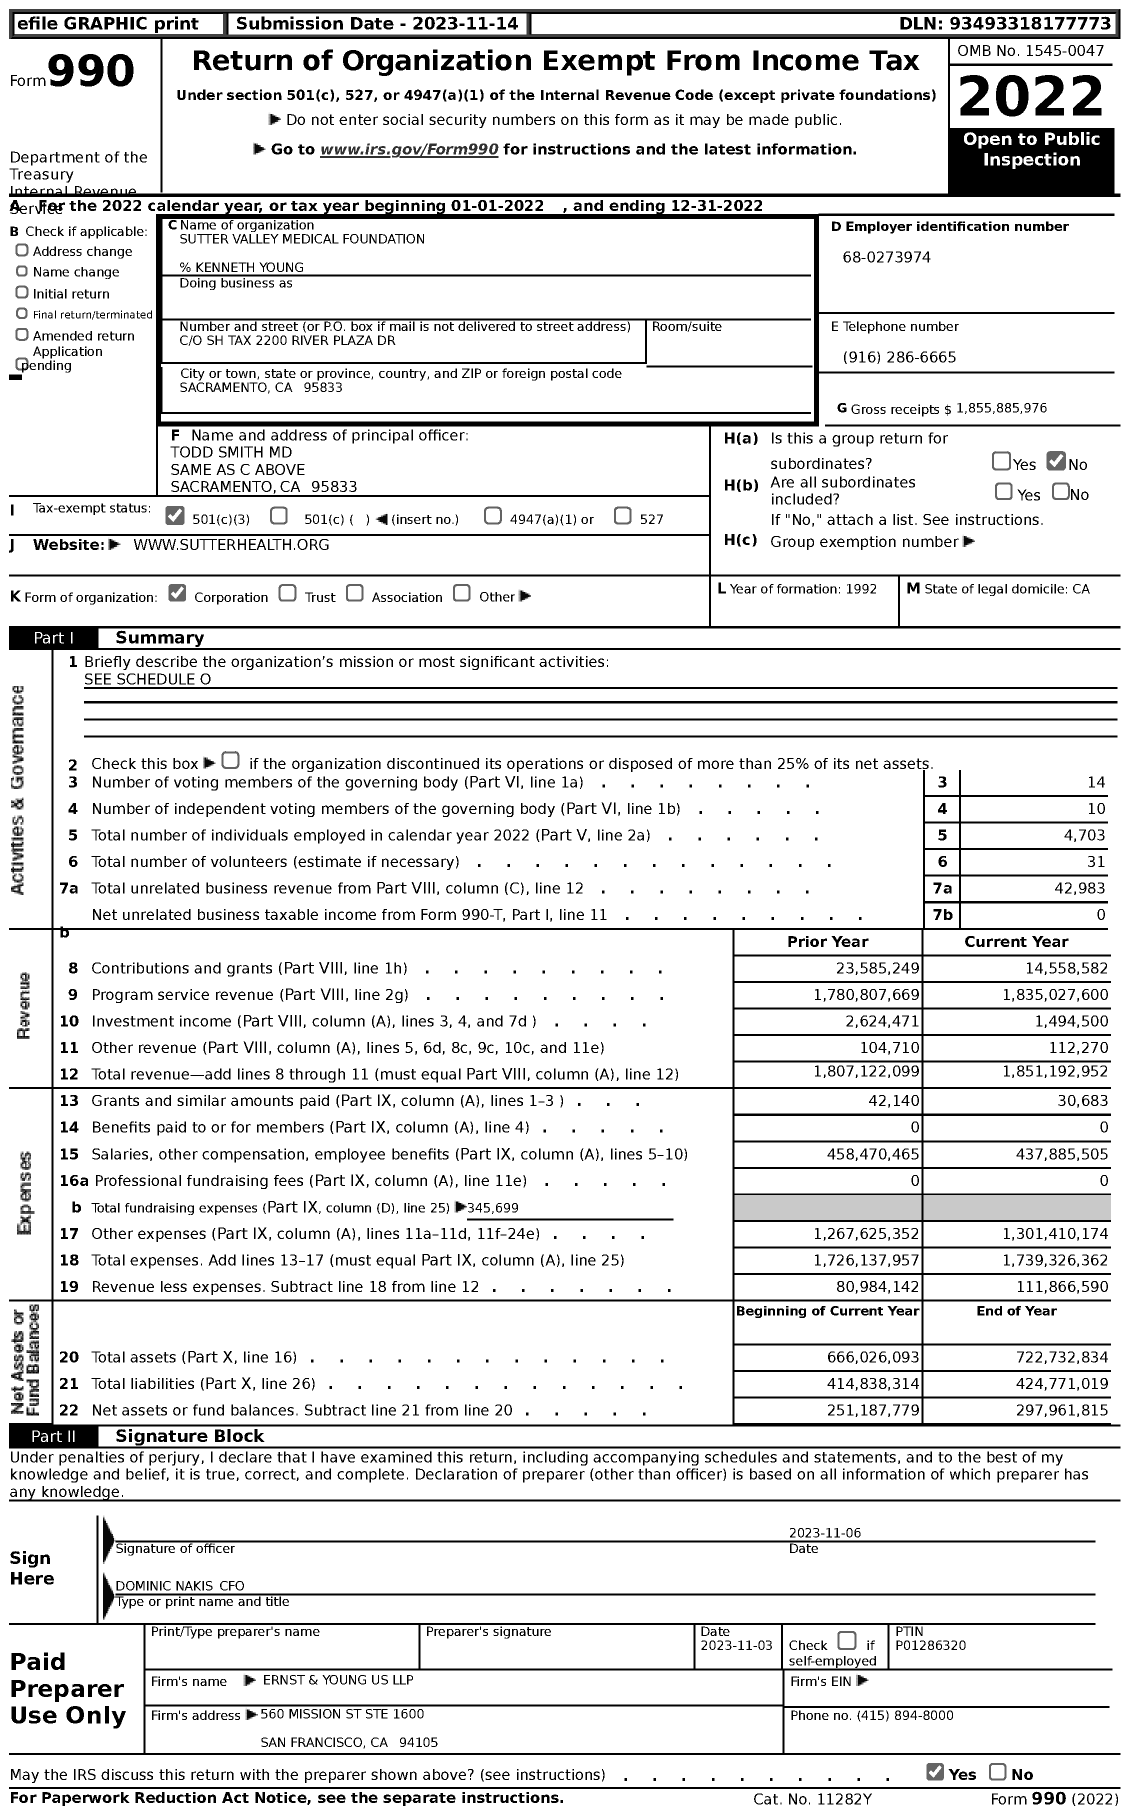 Image of first page of 2022 Form 990 for Sutter Medical Foundation (SMF)